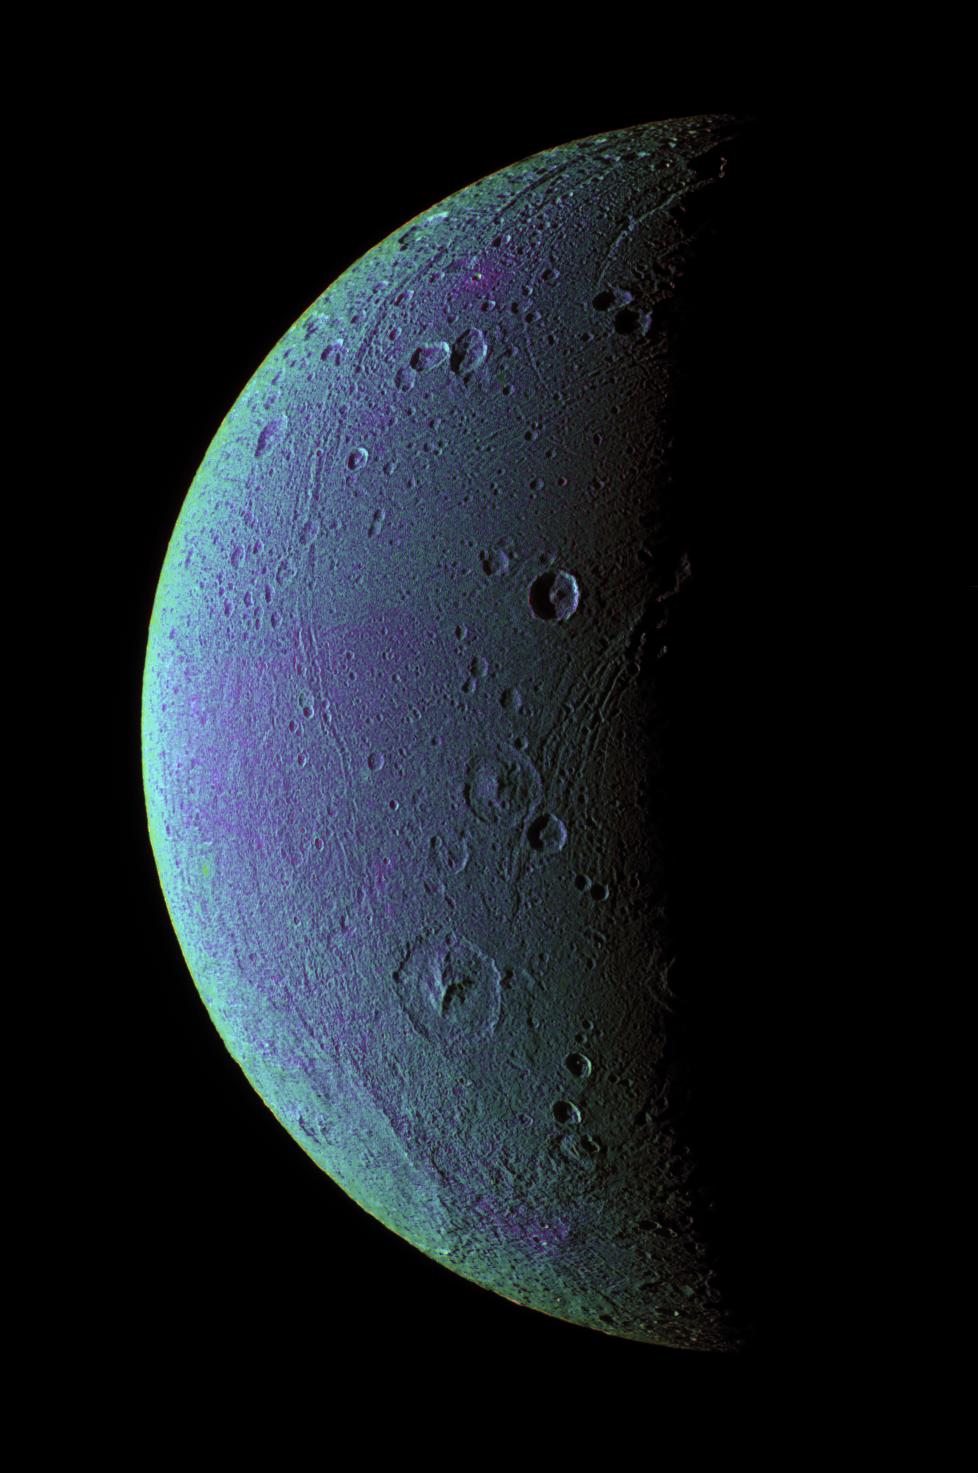 This view highlights tectonic faults and craters on Dione, an icy world that has undoubtedly experienced geologic activity since its formation.